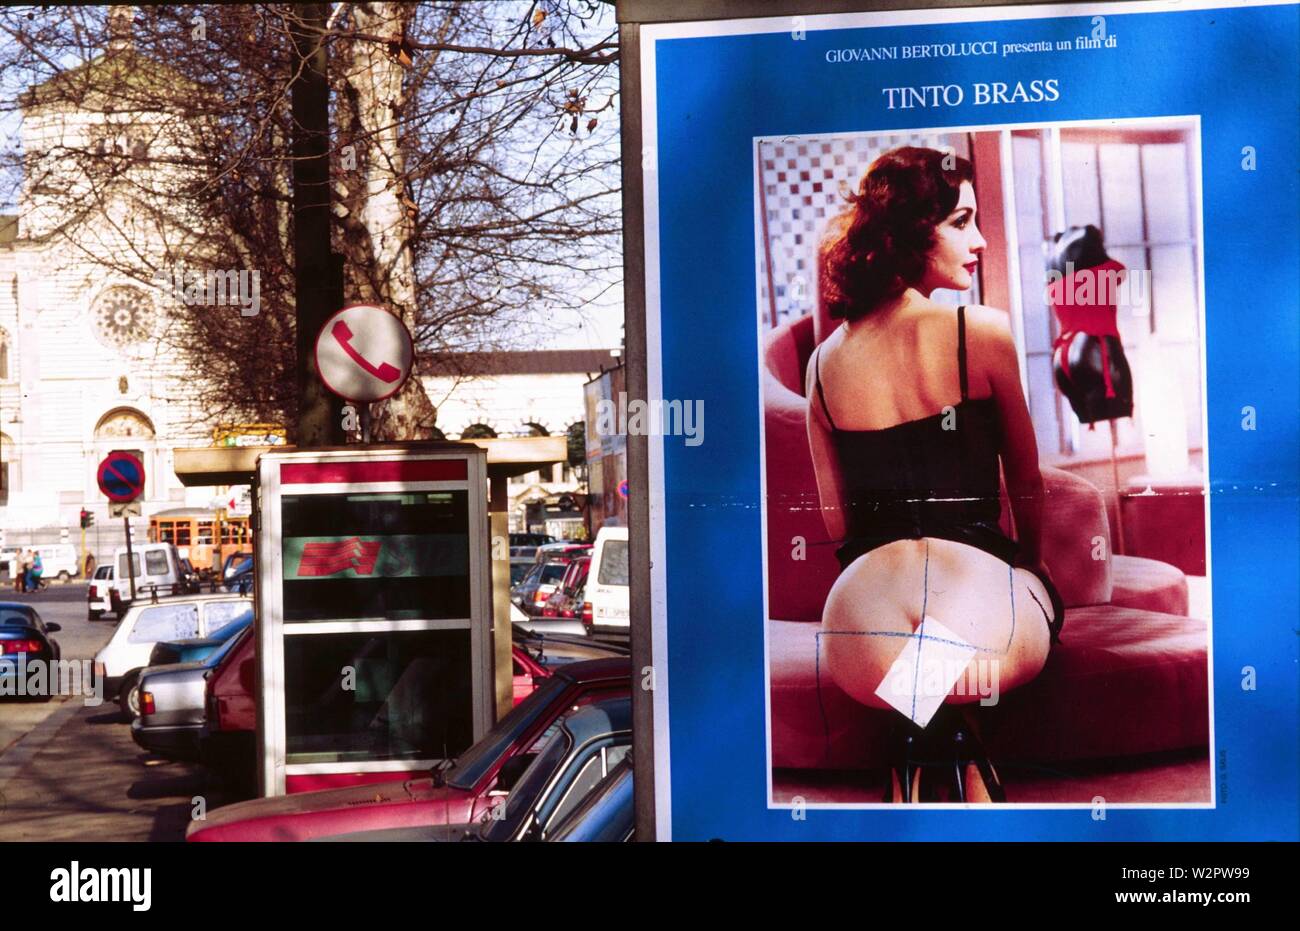 CINEMATOGRAPHIC POSTER REPRESENTING THE FIL OF TINTO BRASS: 'COSI' FAN TUTTE  '(Mantero/Fotogramma, MILAN - 1993-07-30) ps the photo can be used in  respect of the context in which it was taken, and